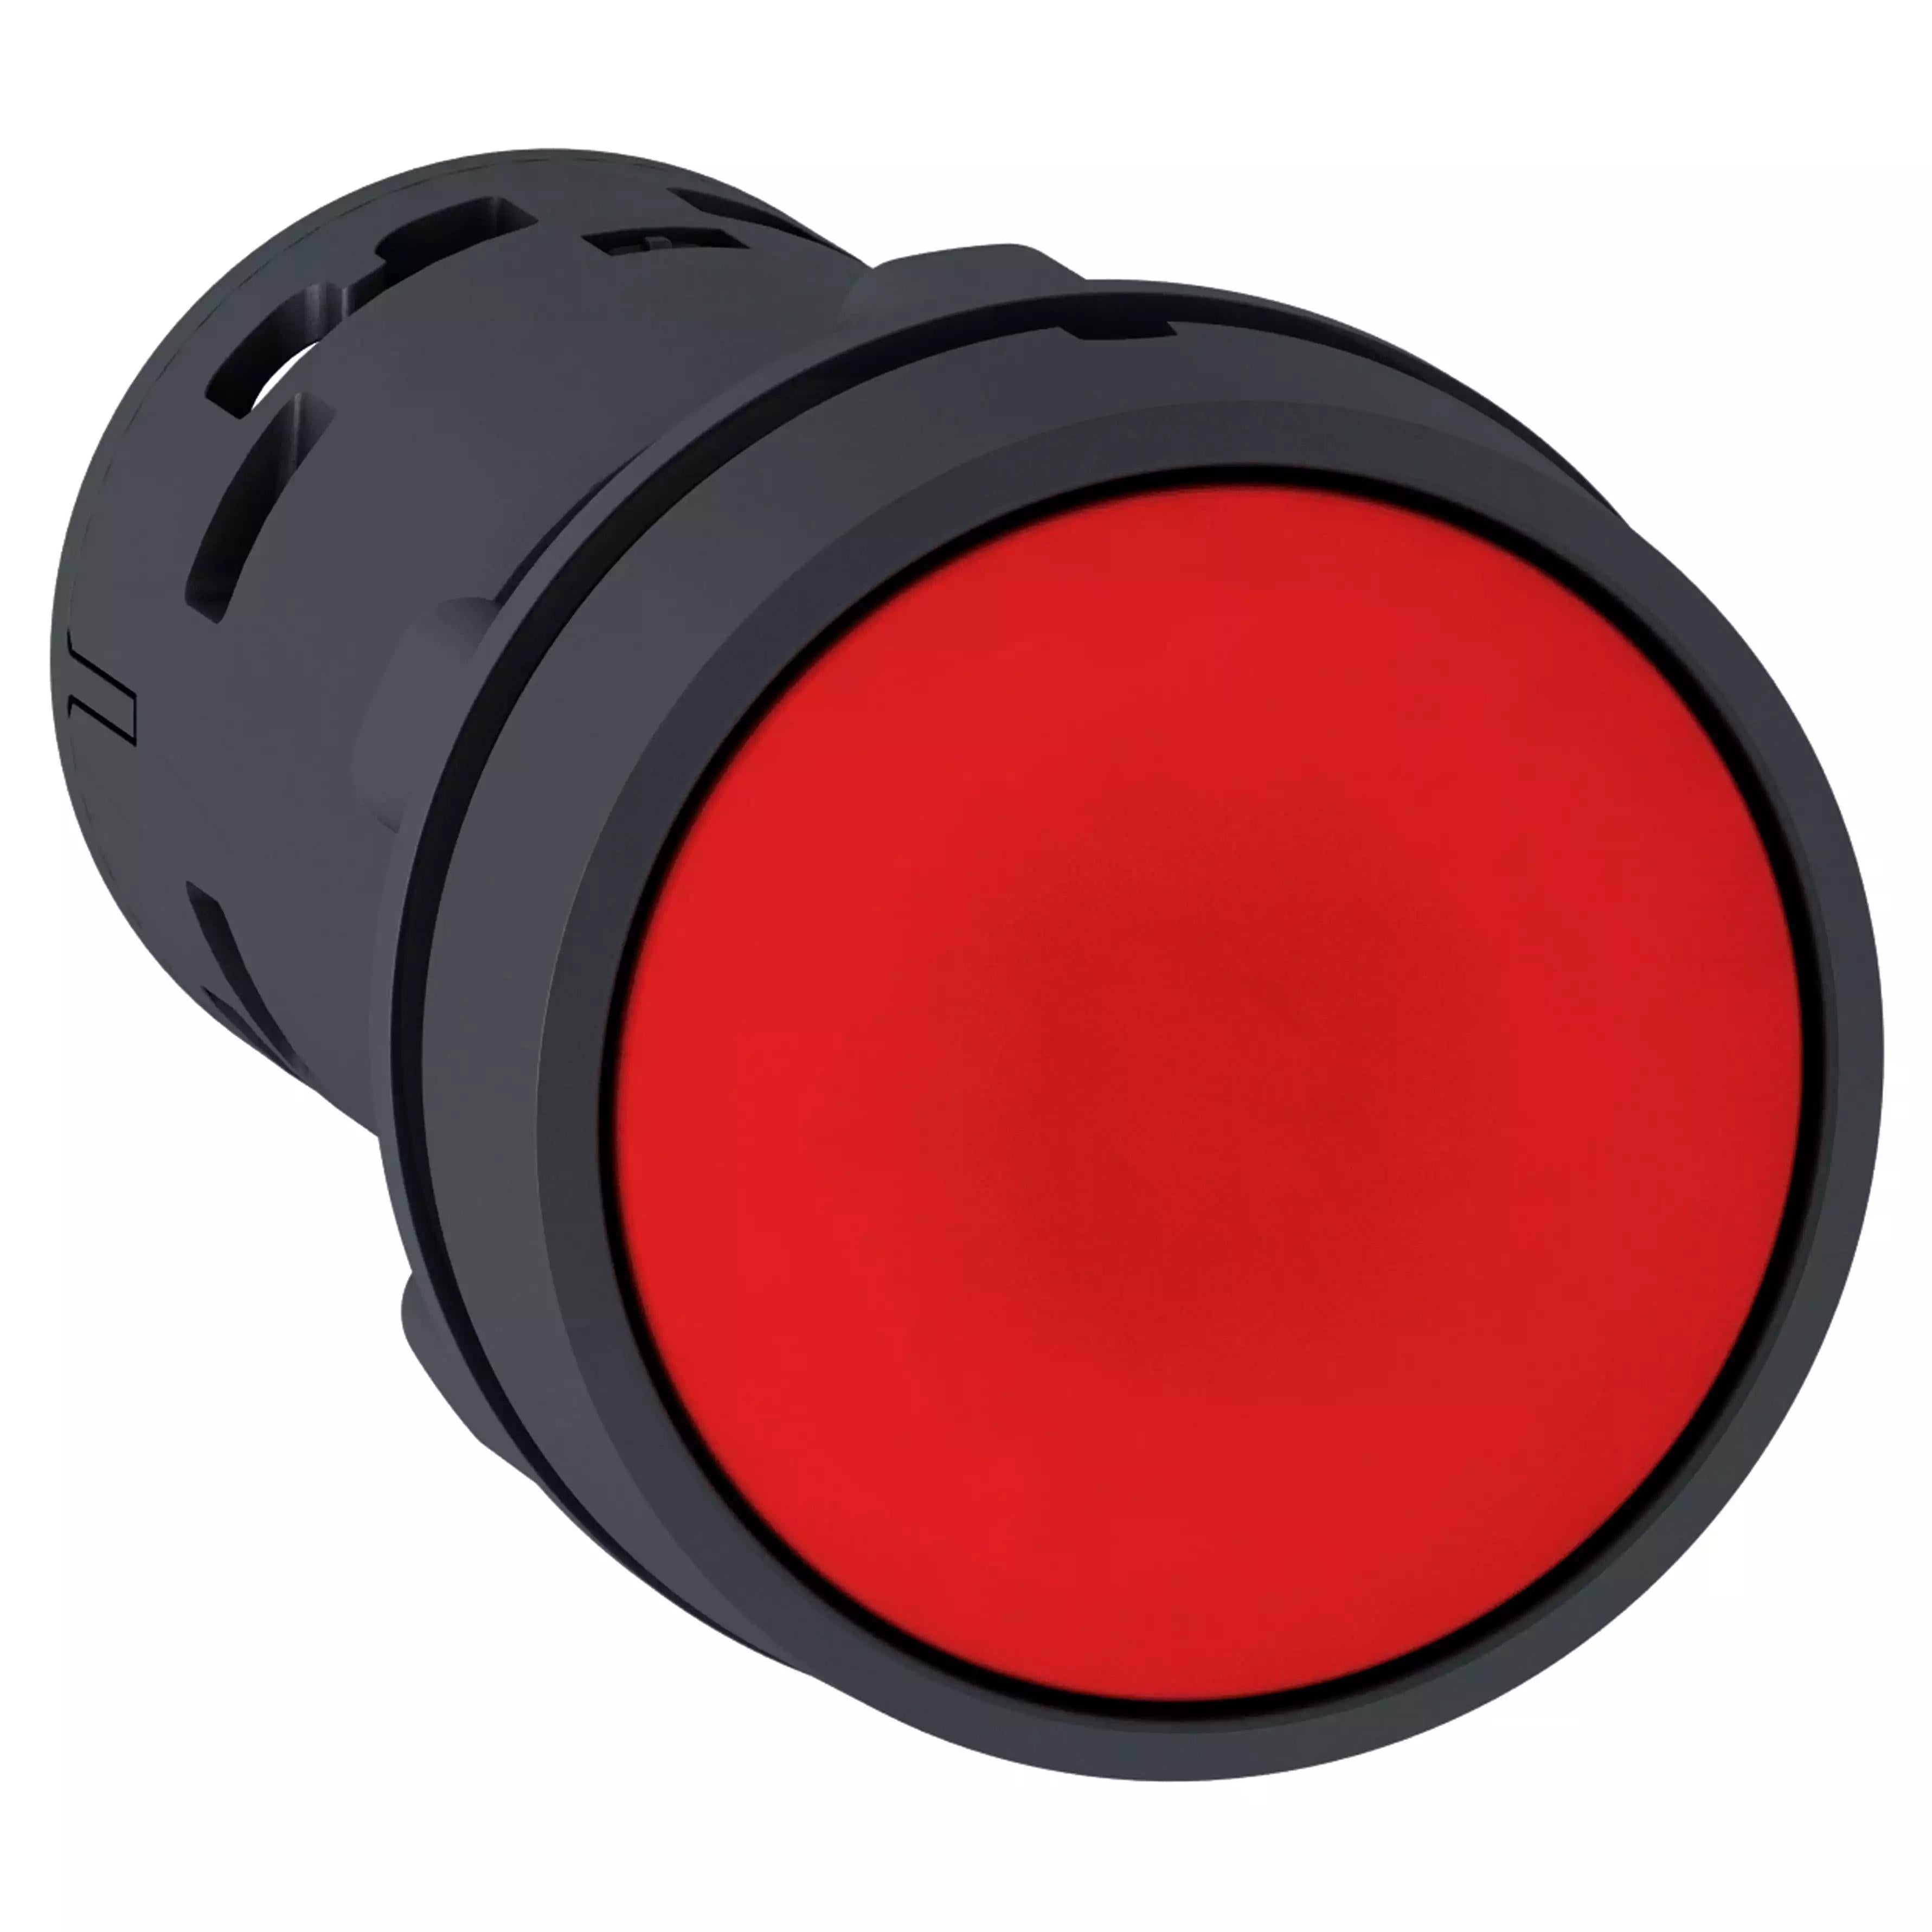 Monolithic push button, Harmony XB7, plastic,red, 22mm, spring return, unmarked, 1NC